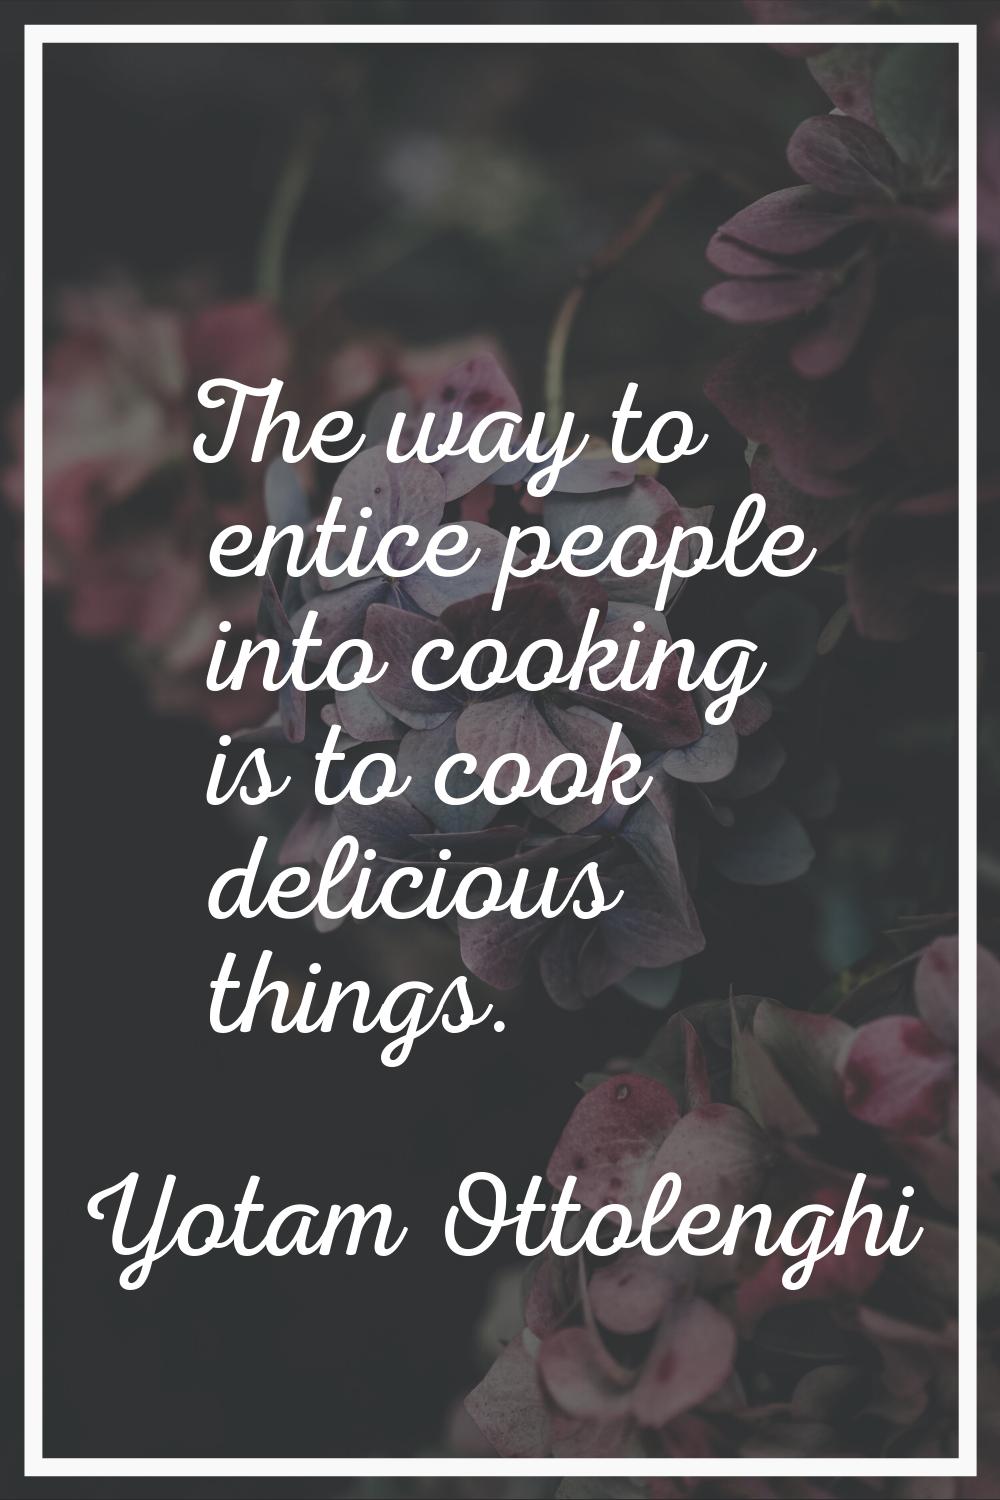 The way to entice people into cooking is to cook delicious things.